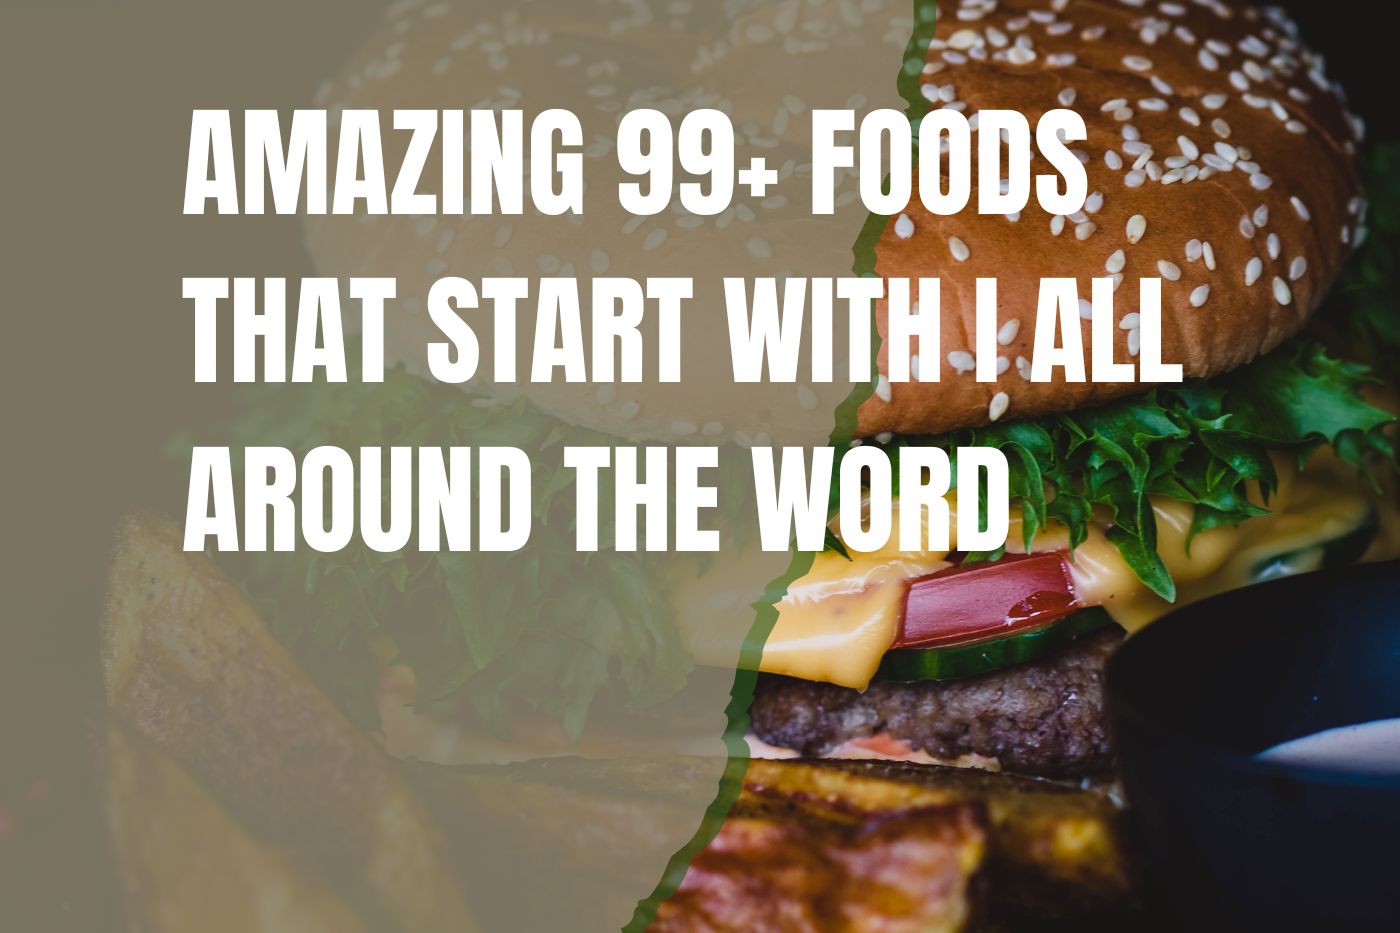 Amazing 99+ Foods that Start with I All Around The Word